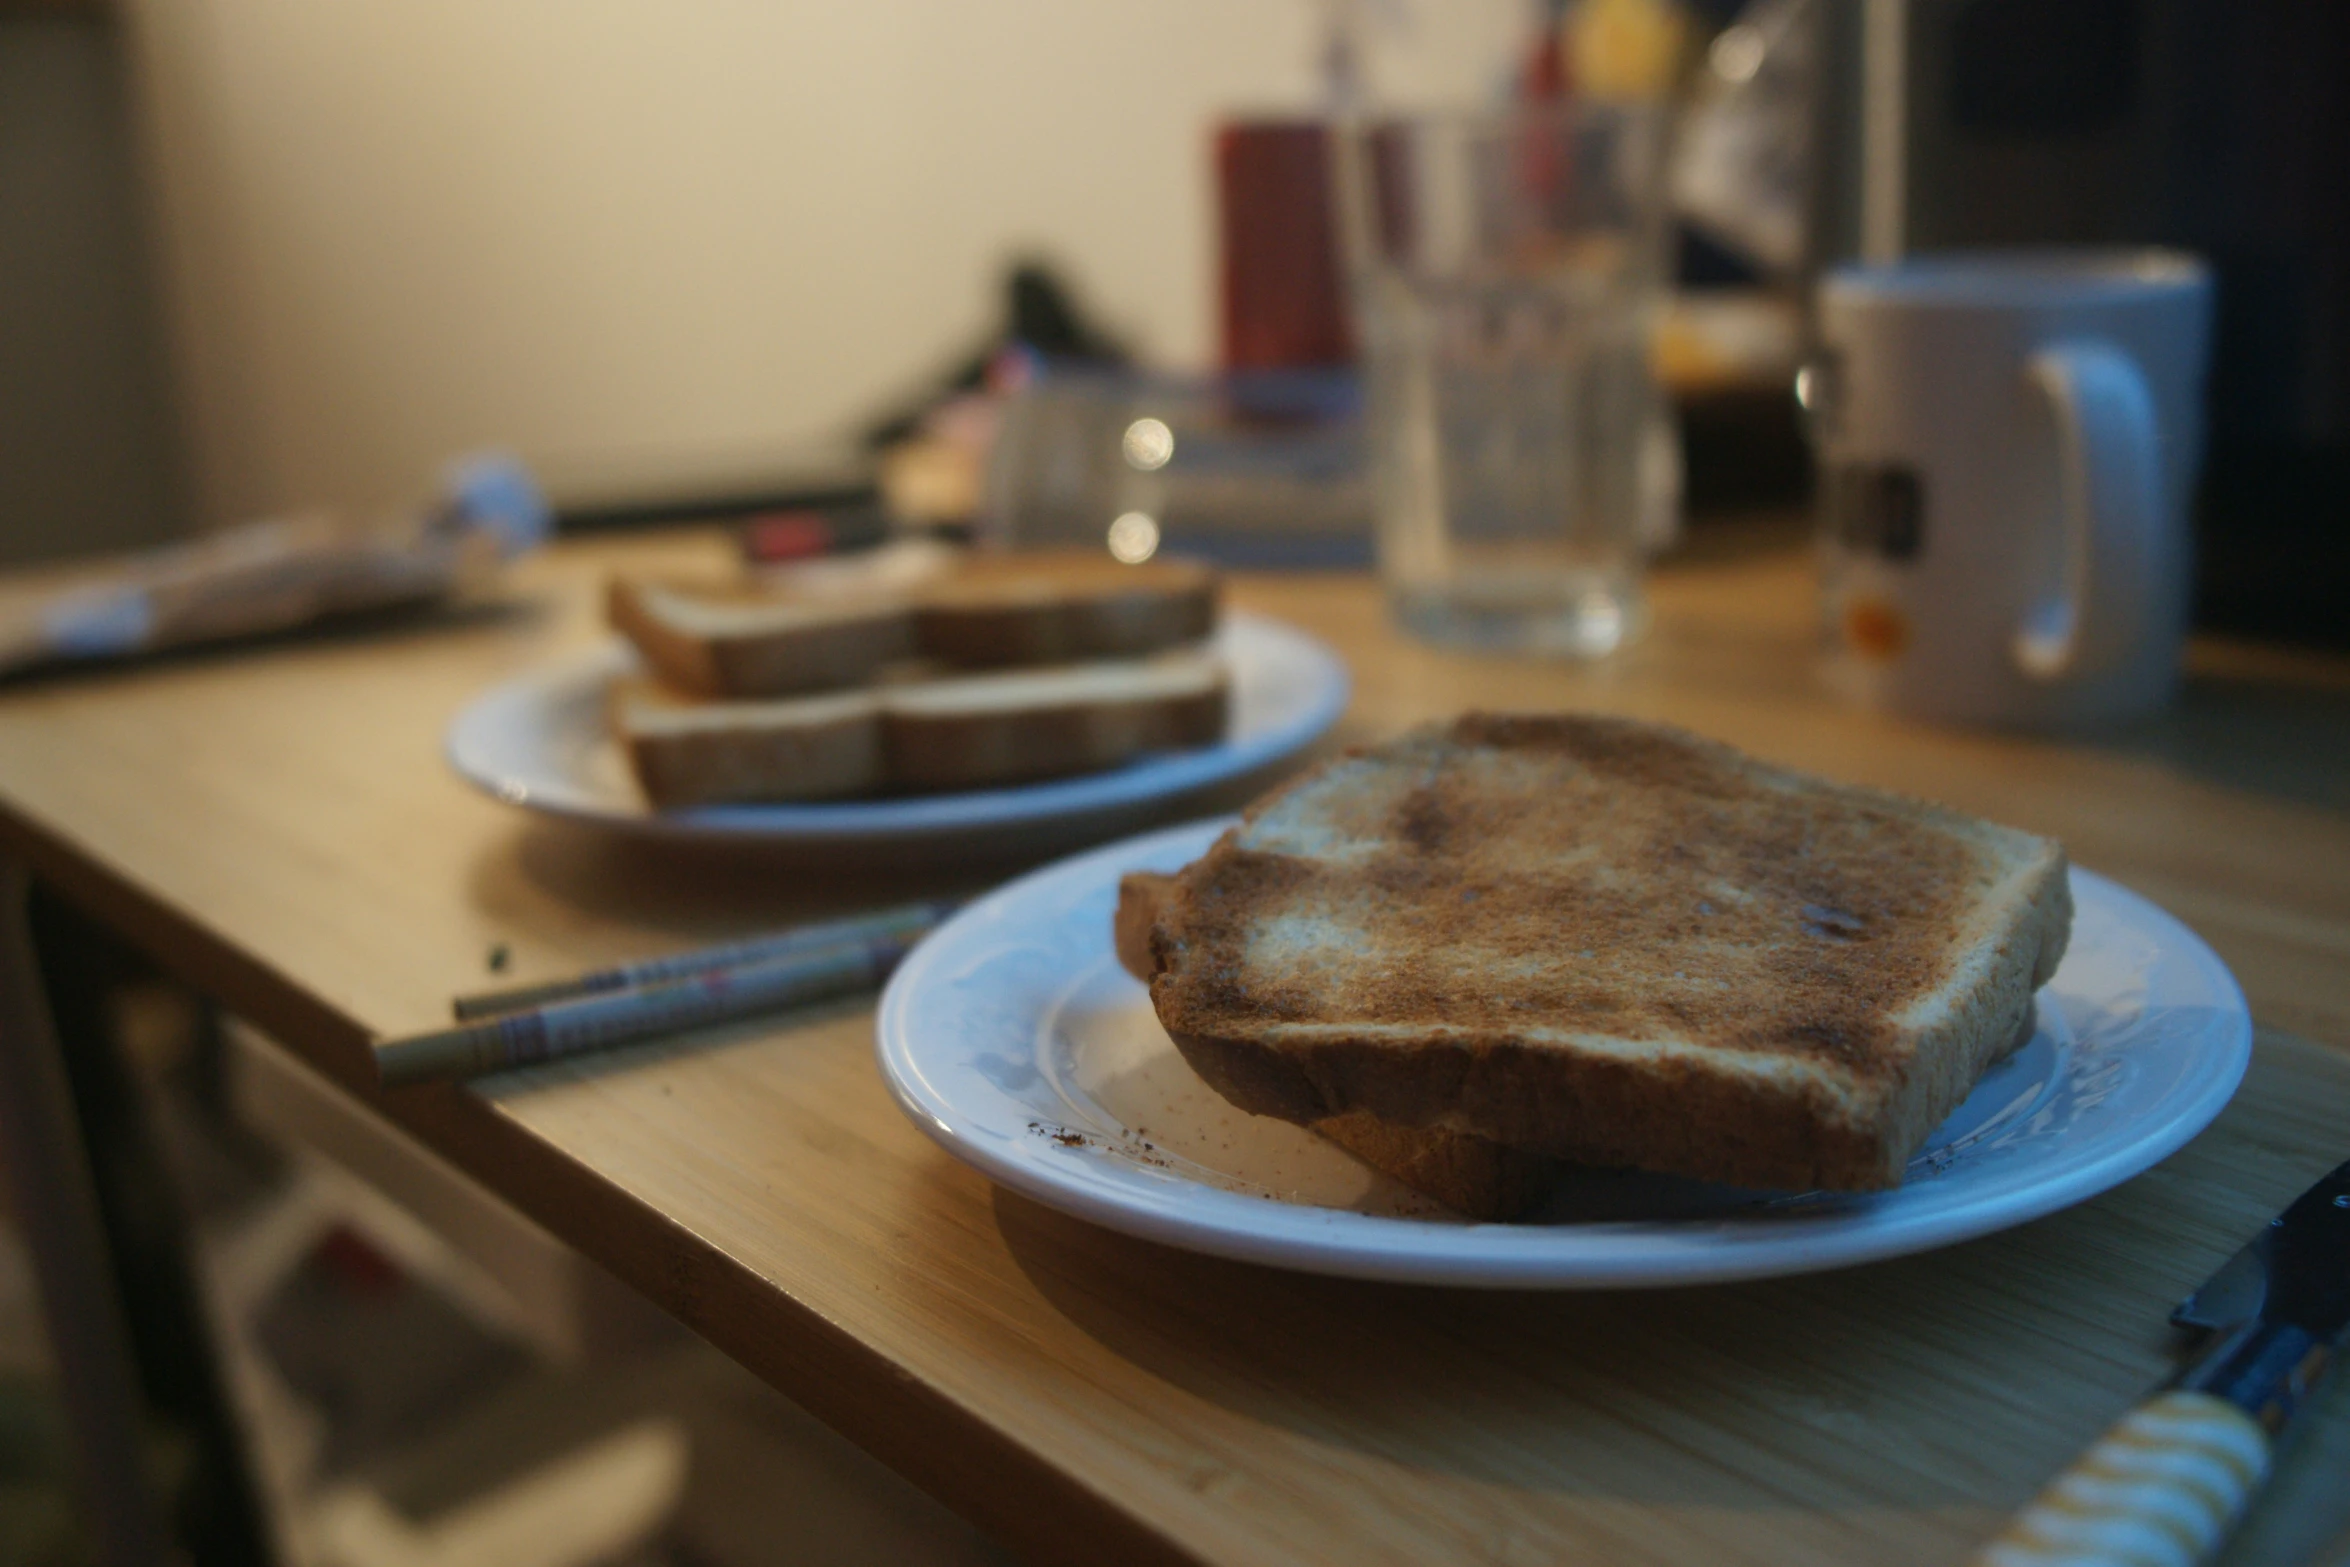 two pieces of toast sit on white plates near coffee cups